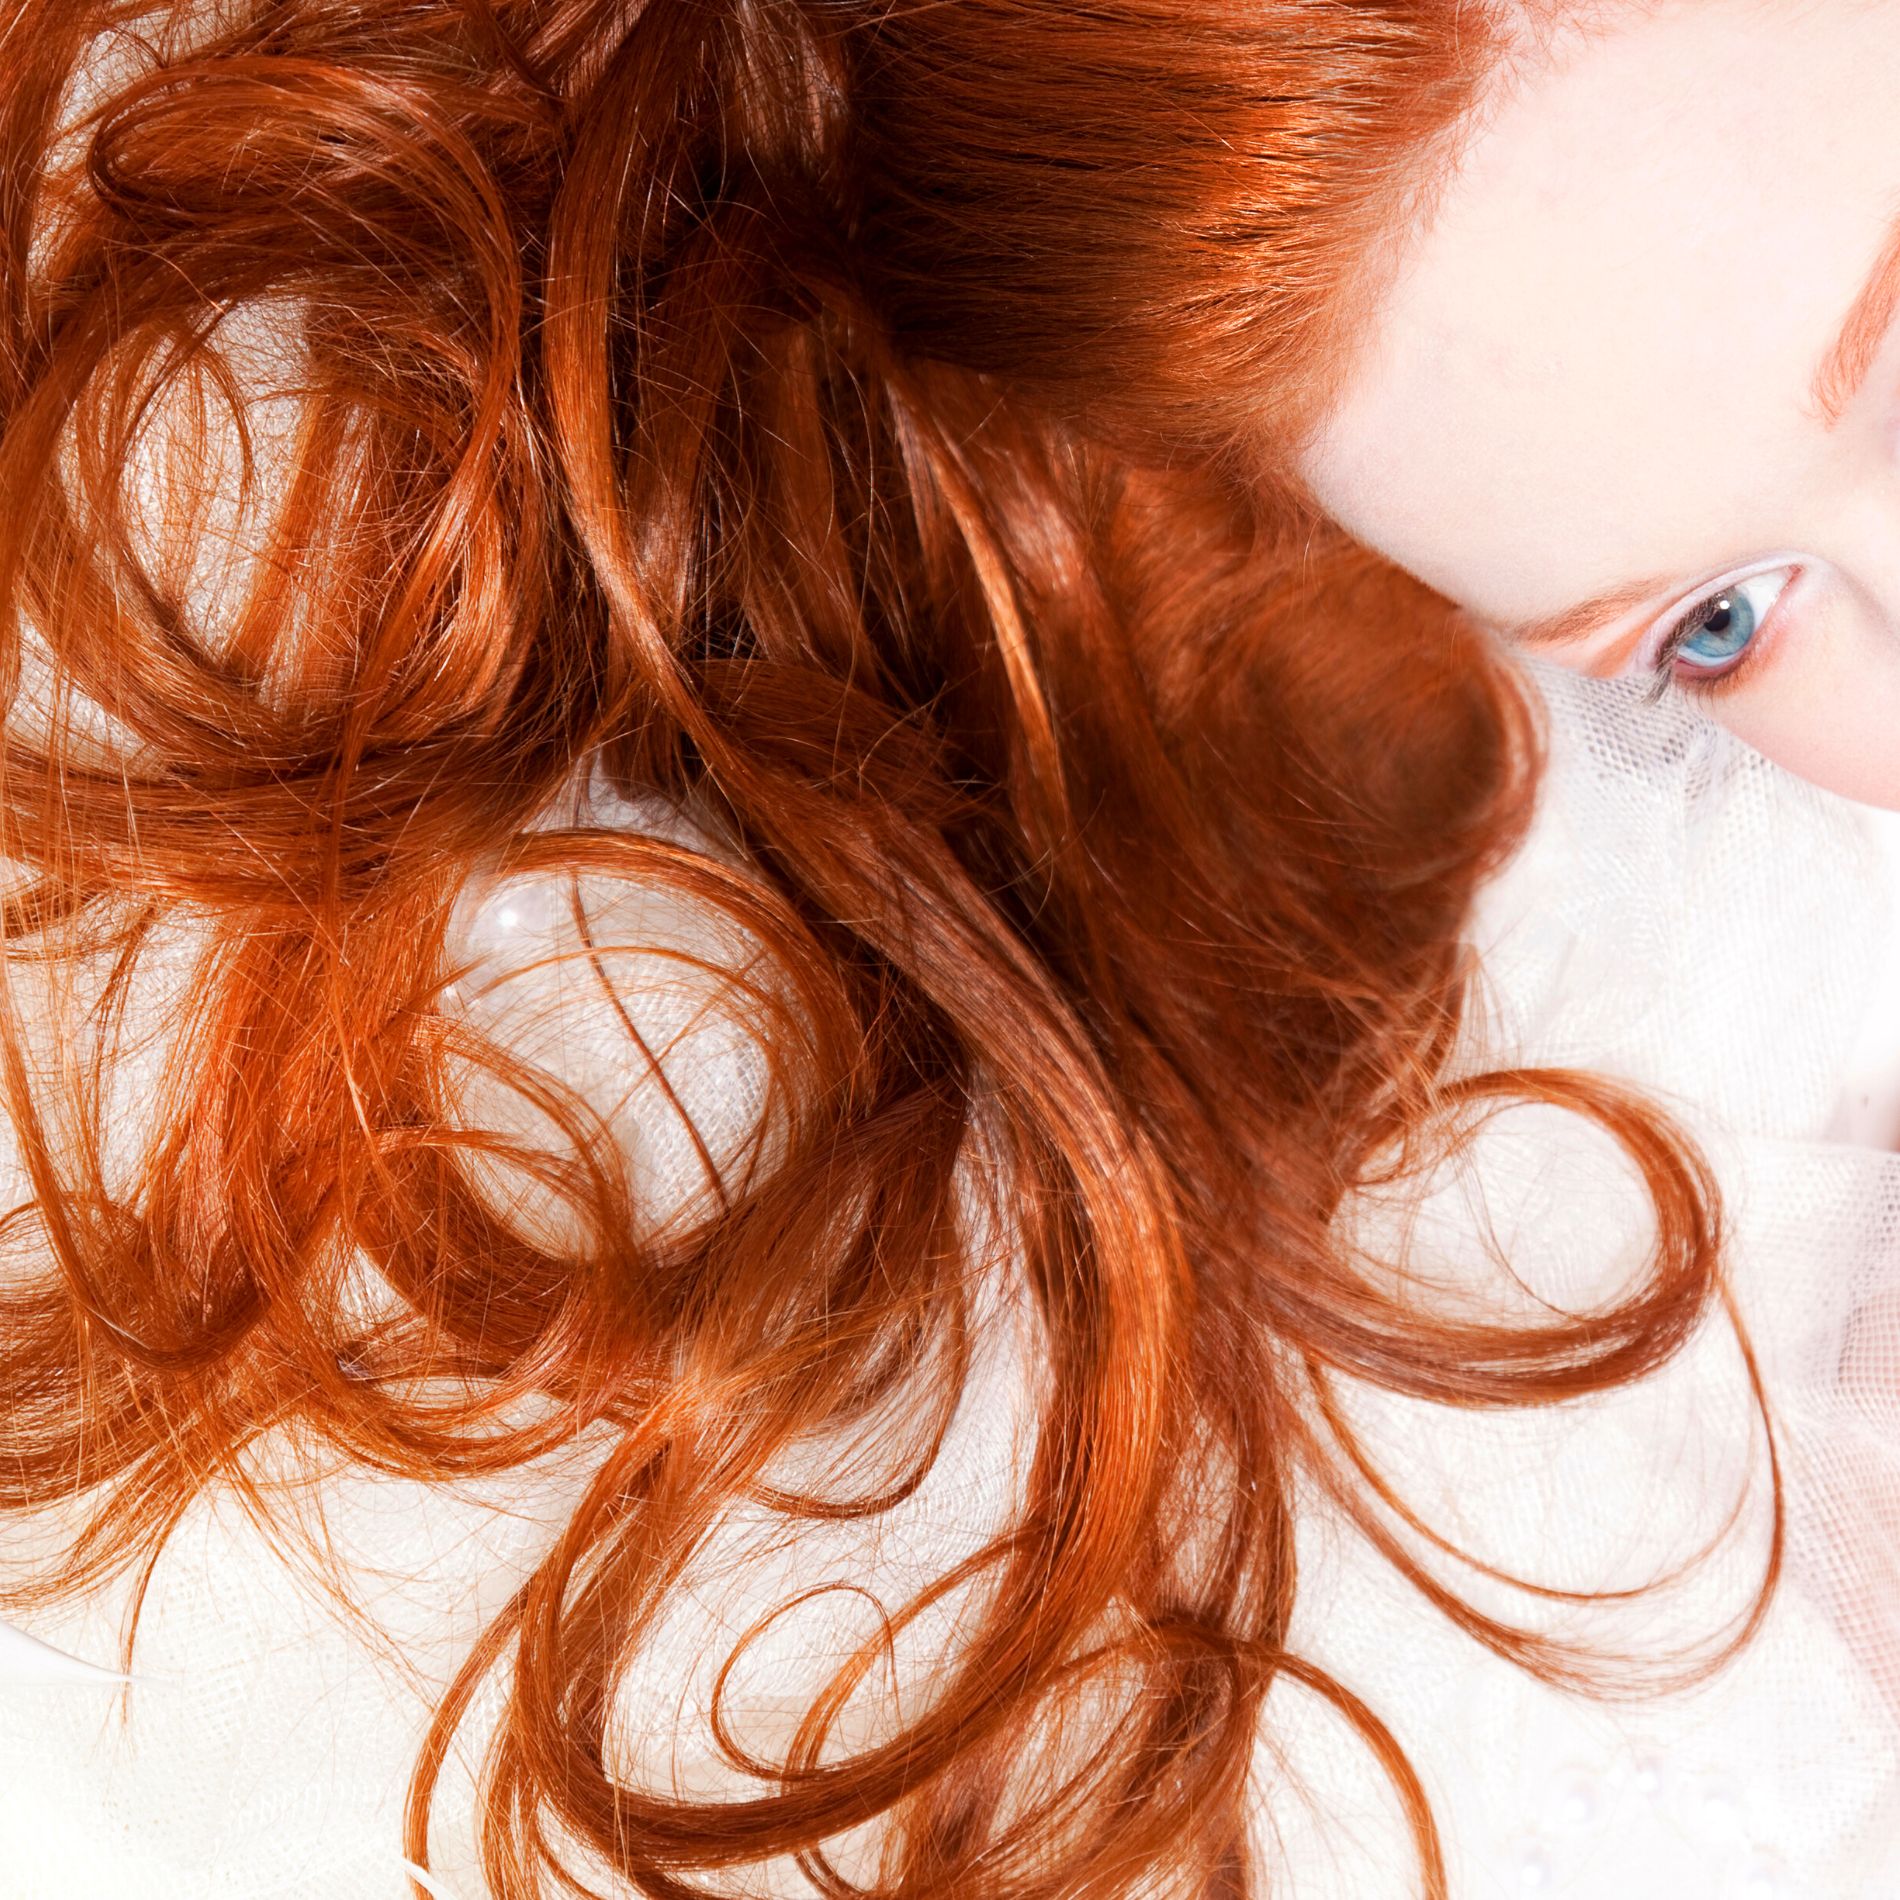 How to enhance natural red hair